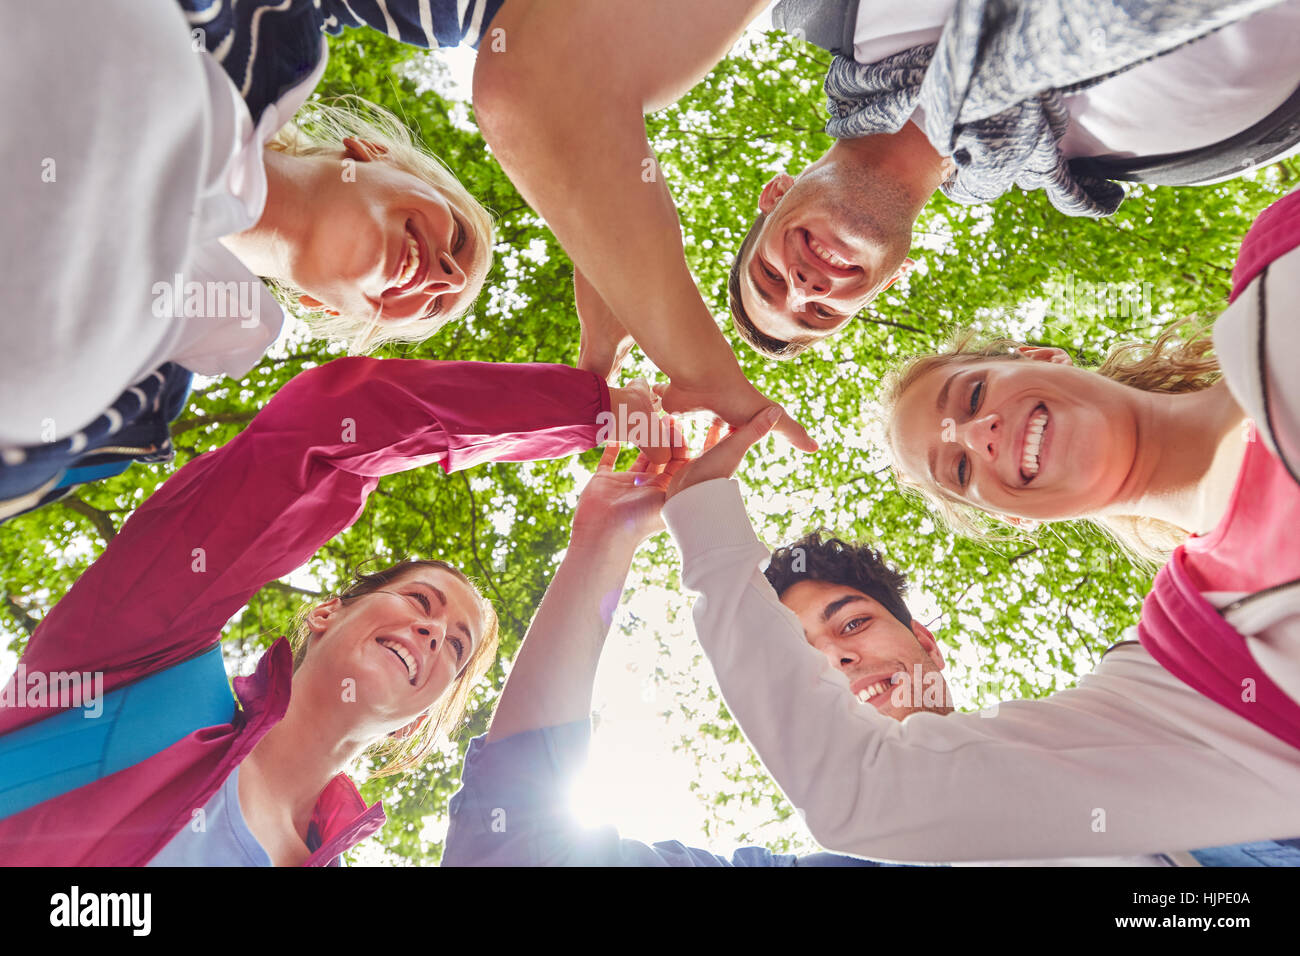 Students giving each other a High Five as symbol of togetherness Stock Photo